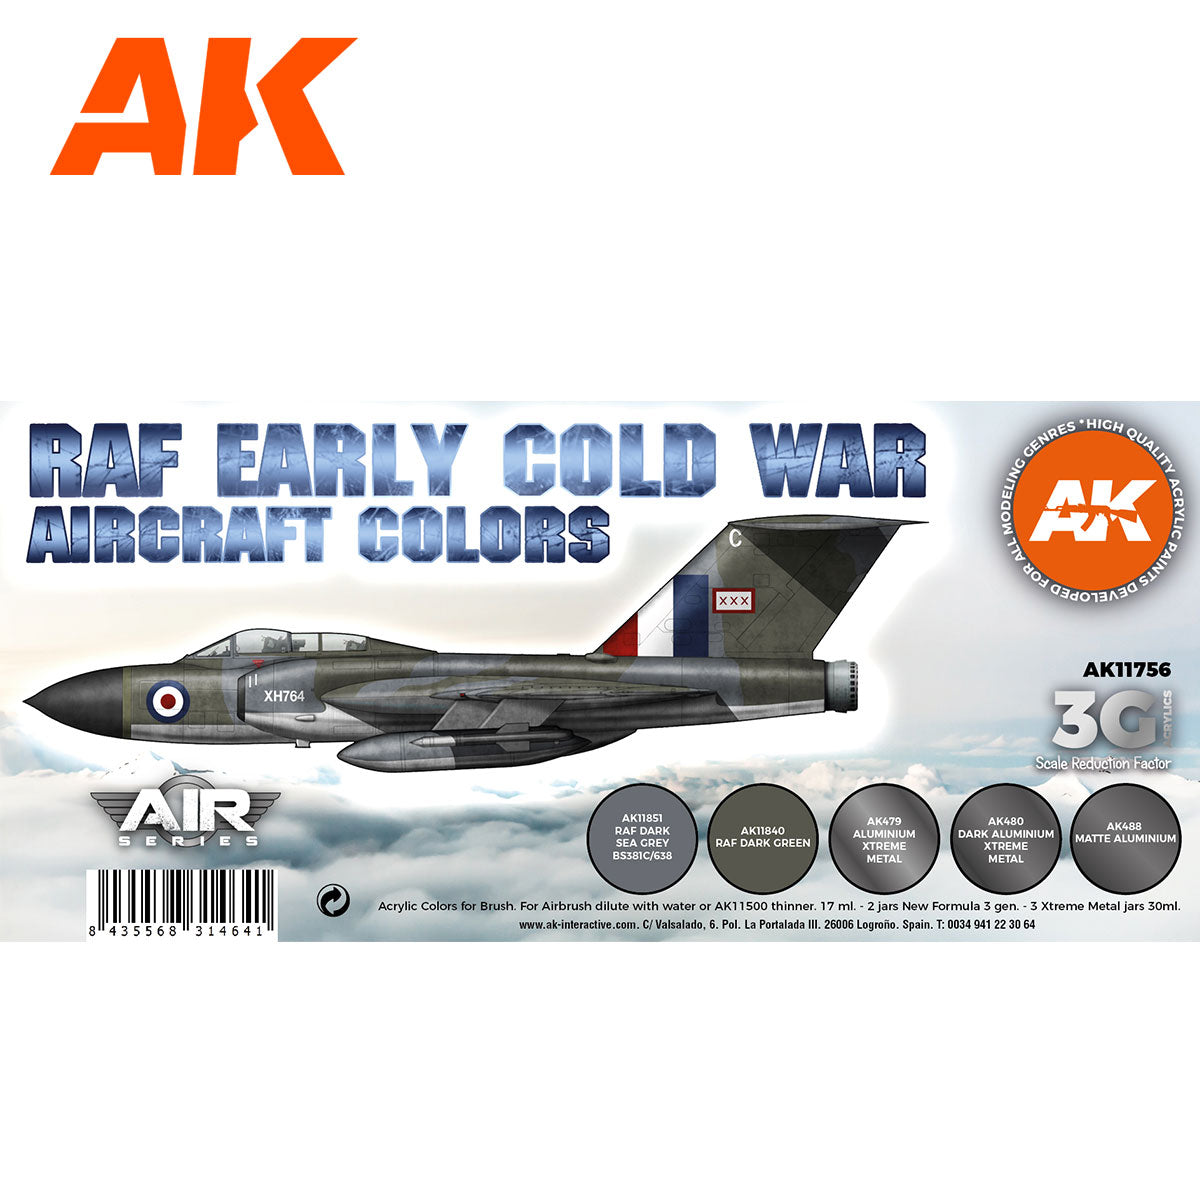 3Gen Aircraft Paint Set - Early Cold War RAF Aircraft Colors Set - Loaded Dice